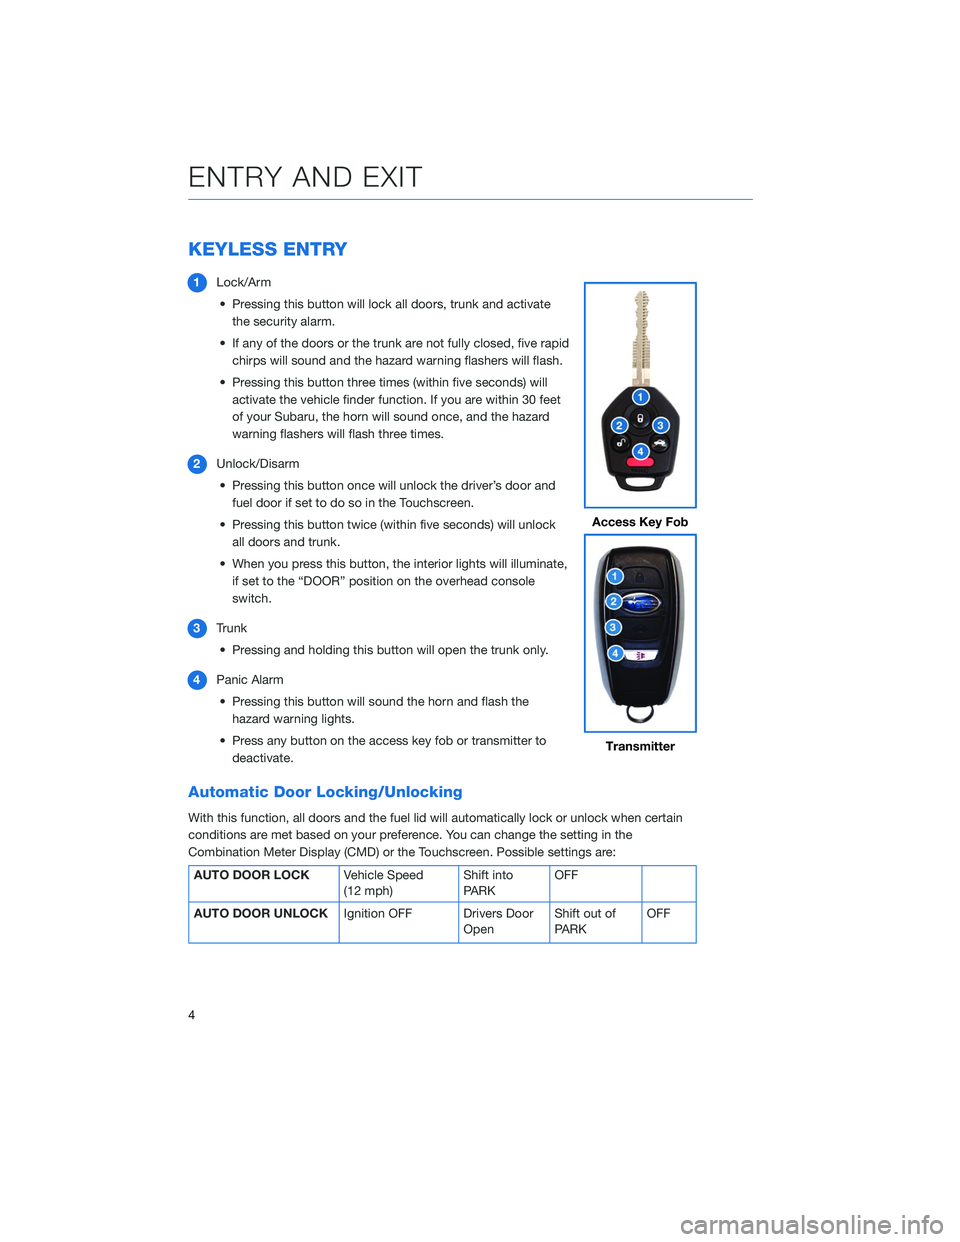 SUBARU LEGACY 2020  Getting Started Guide KEYLESS ENTRY
1Lock/Arm
• Pressing this button will lock all doors, trunk and activate the security alarm.
• If any of the doors or the trunk are not fully closed, five rapid chirps will sound and